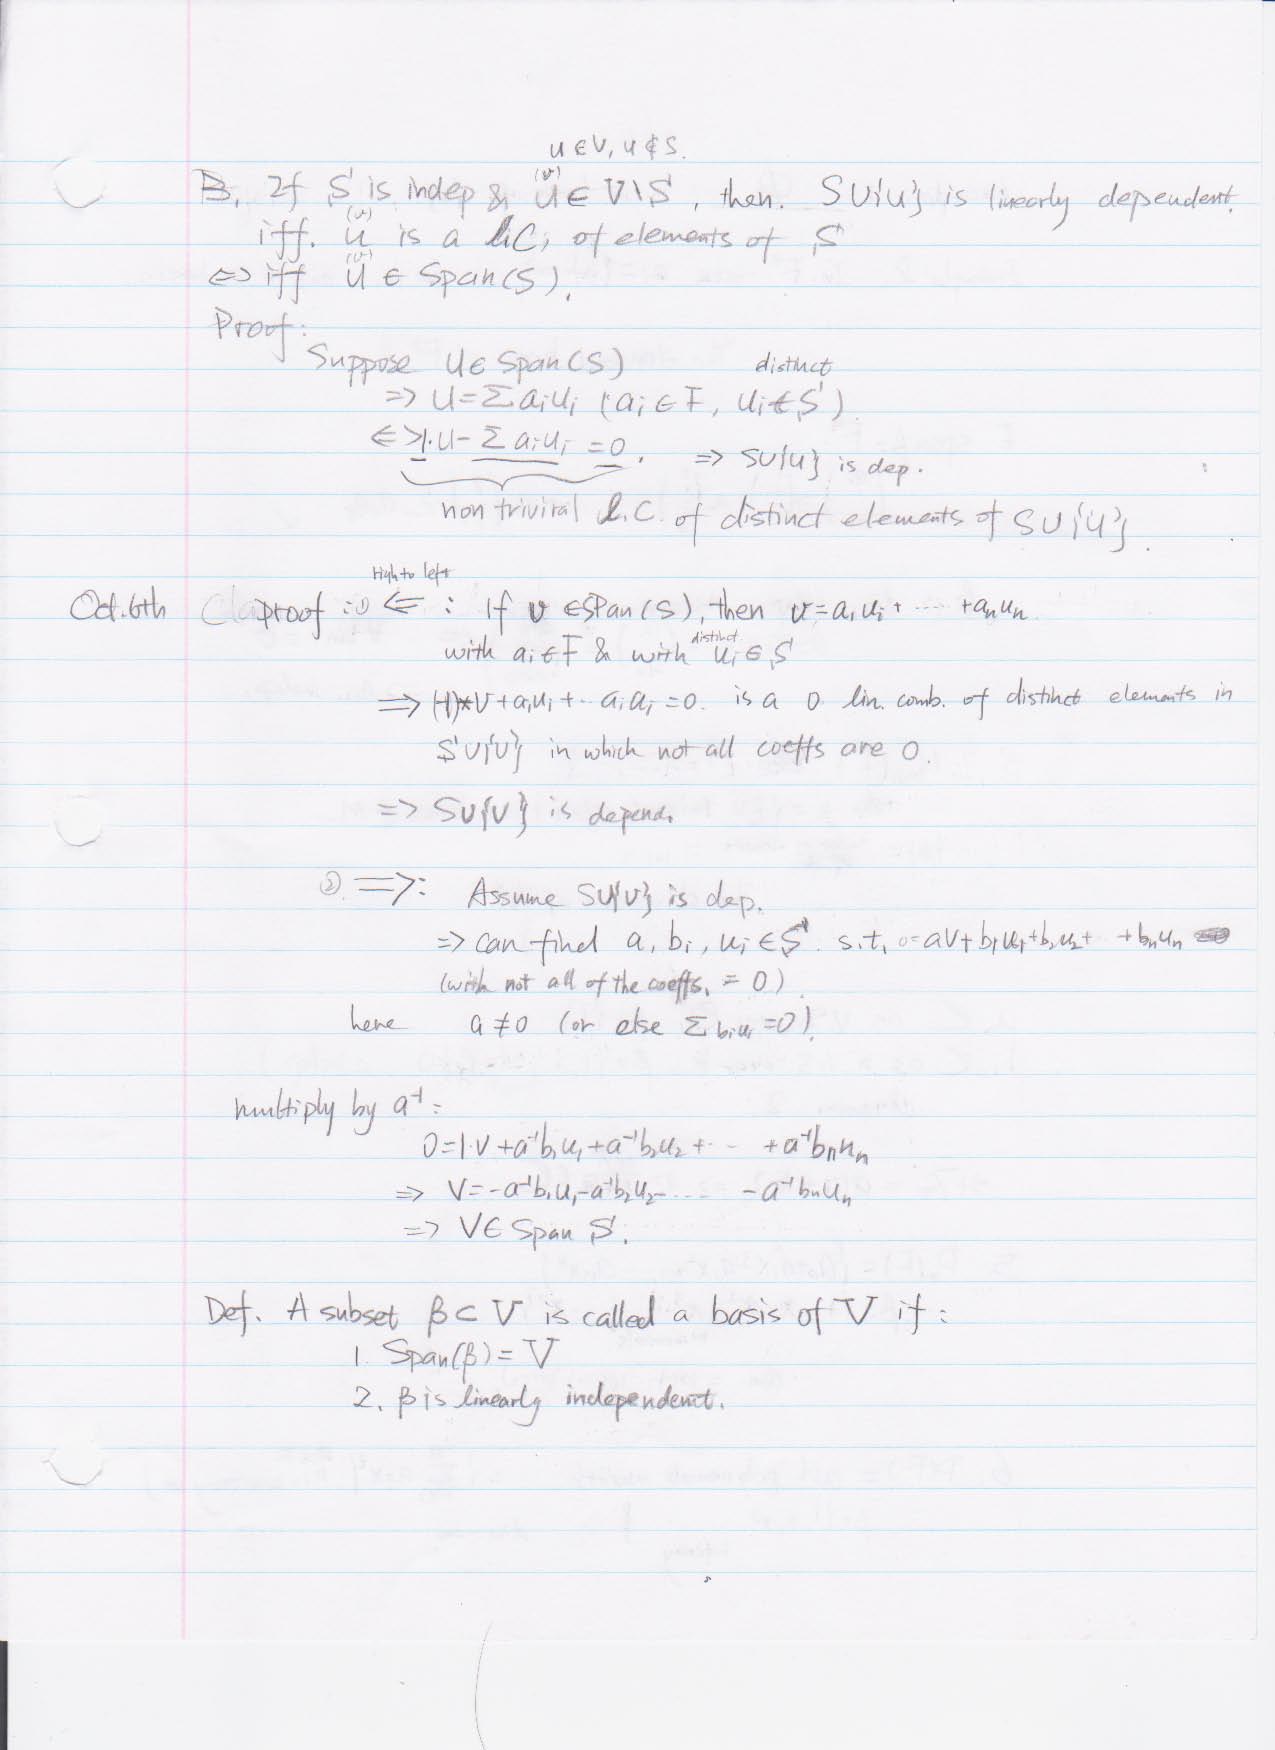 Image-Oct.6th class notes pg1.jpg